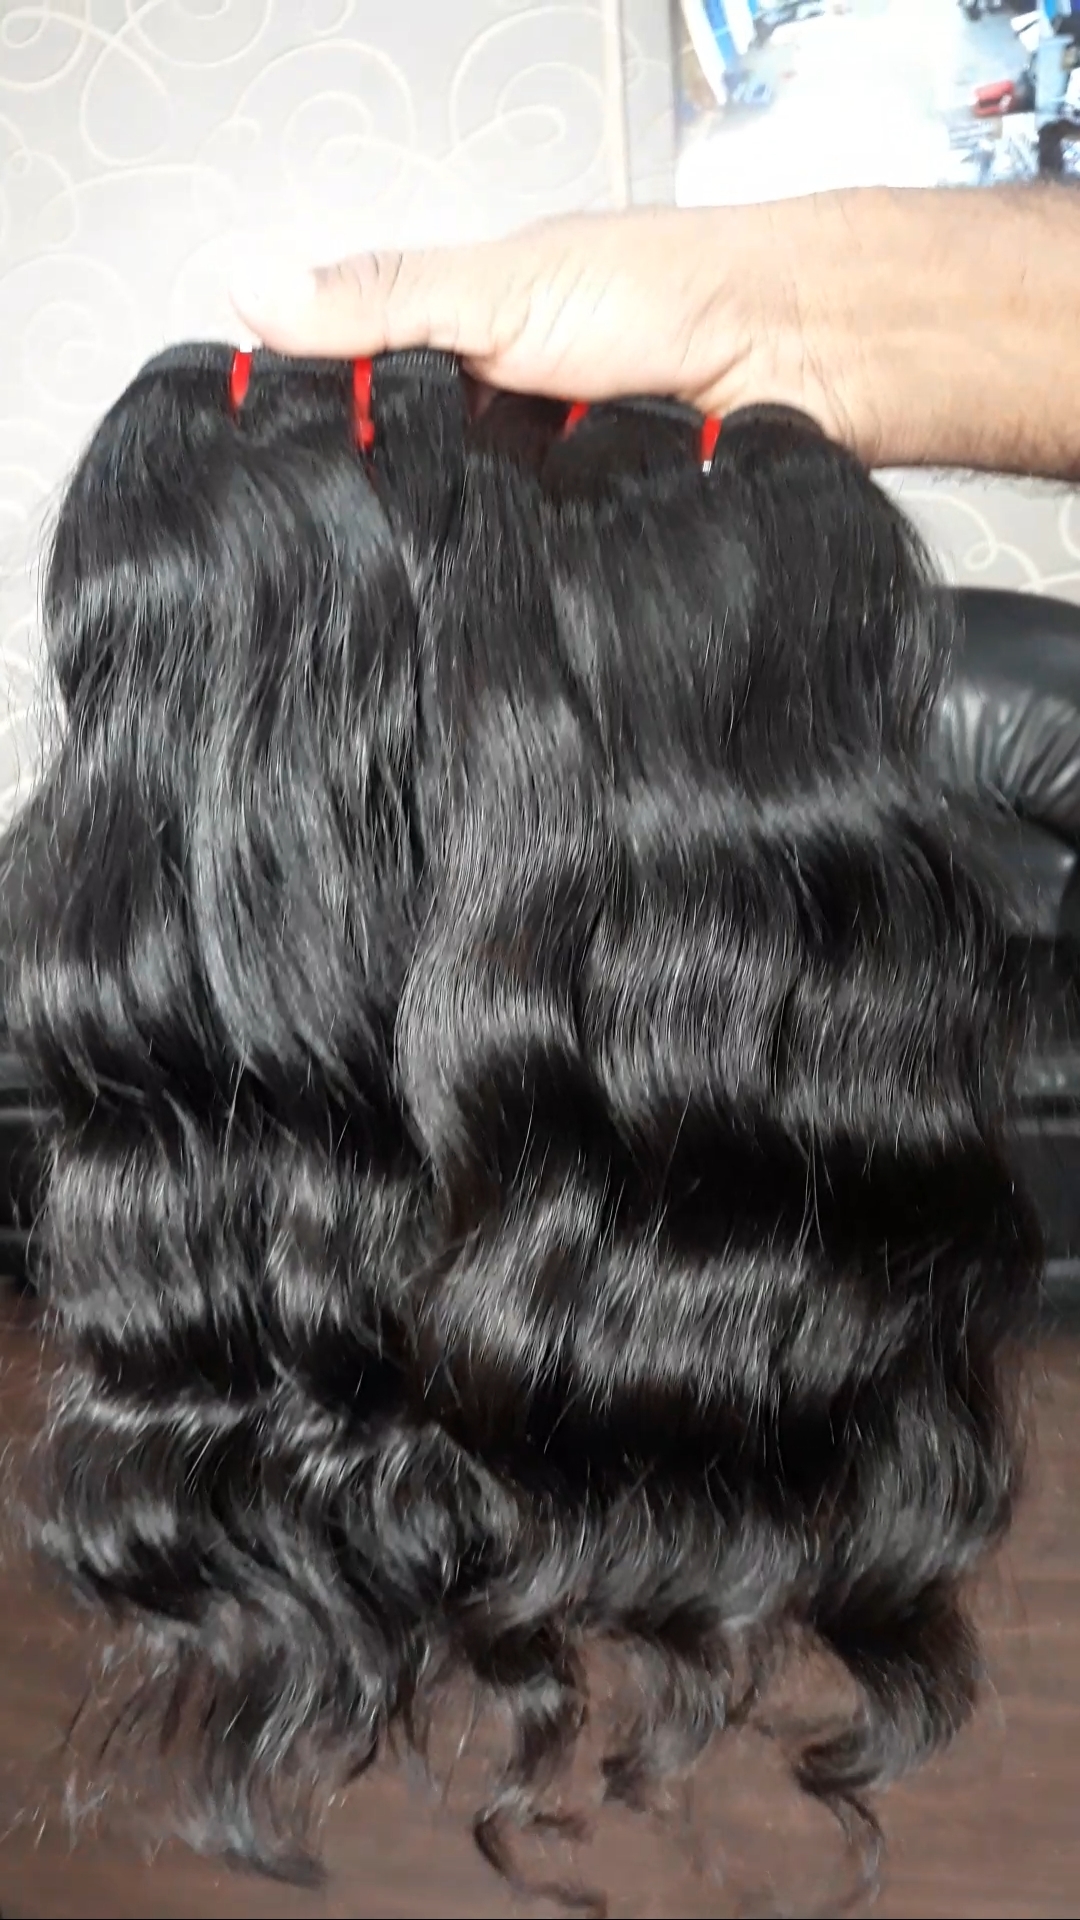 Body Wave human hair extension